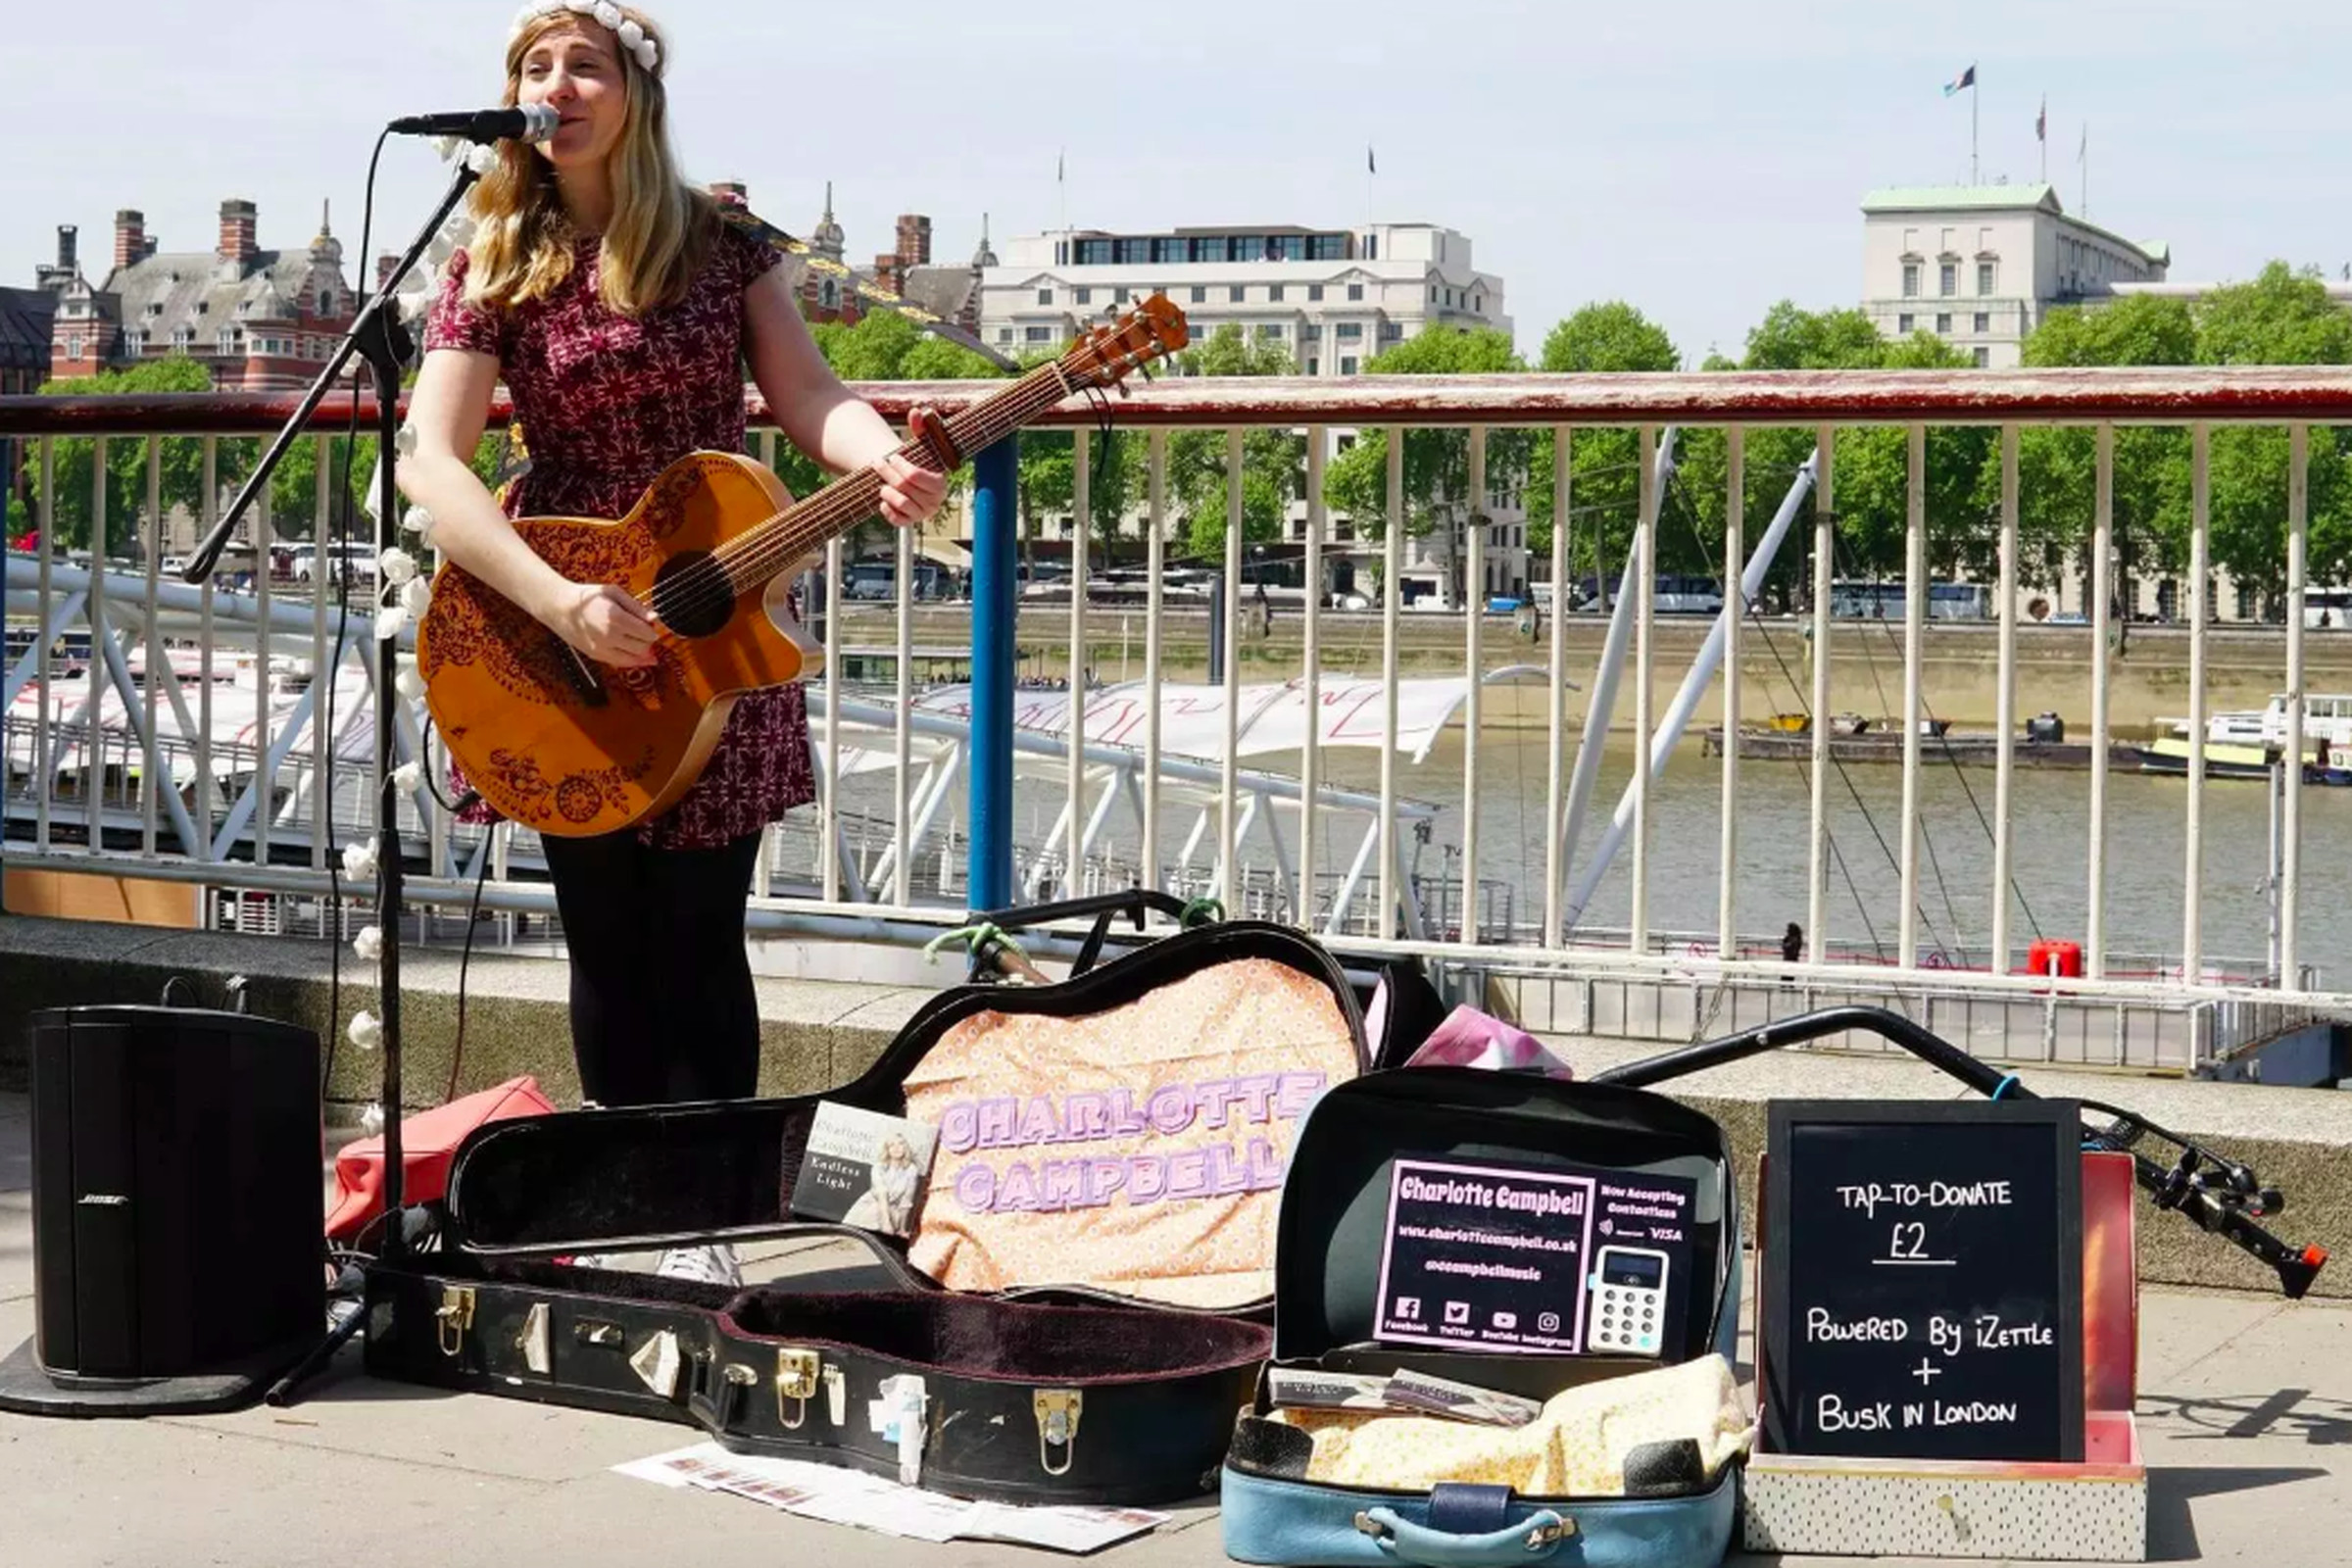 London busker Charlotte Campbell was one of those that trialled the new system. 